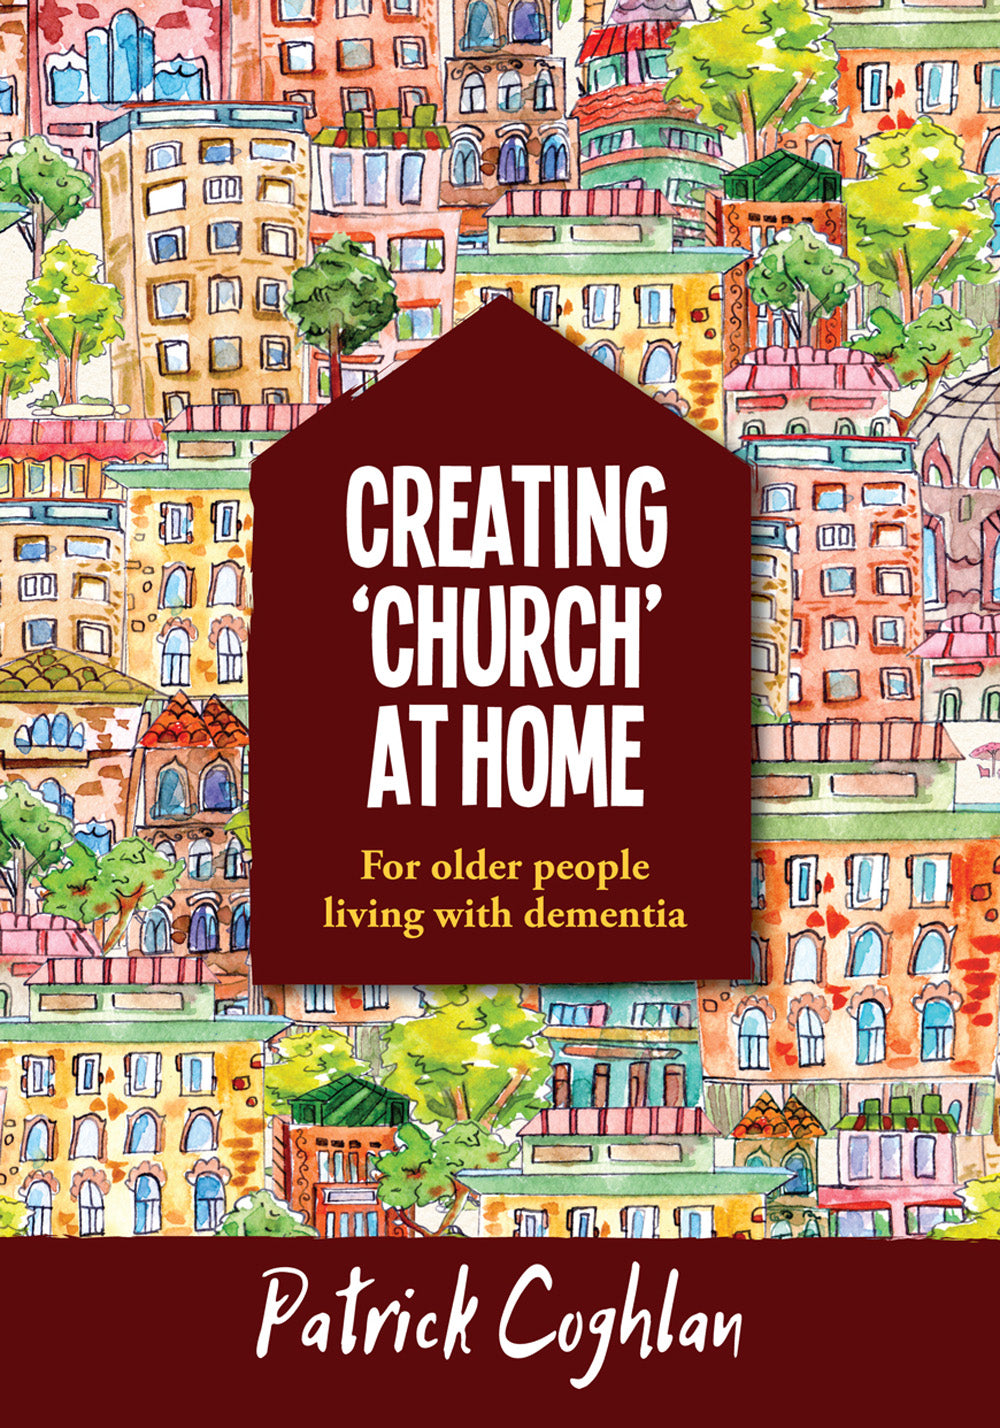 Creating Church At Home - For Older People Living With DementiaCreating Church At Home - For Older People Living With Dementia